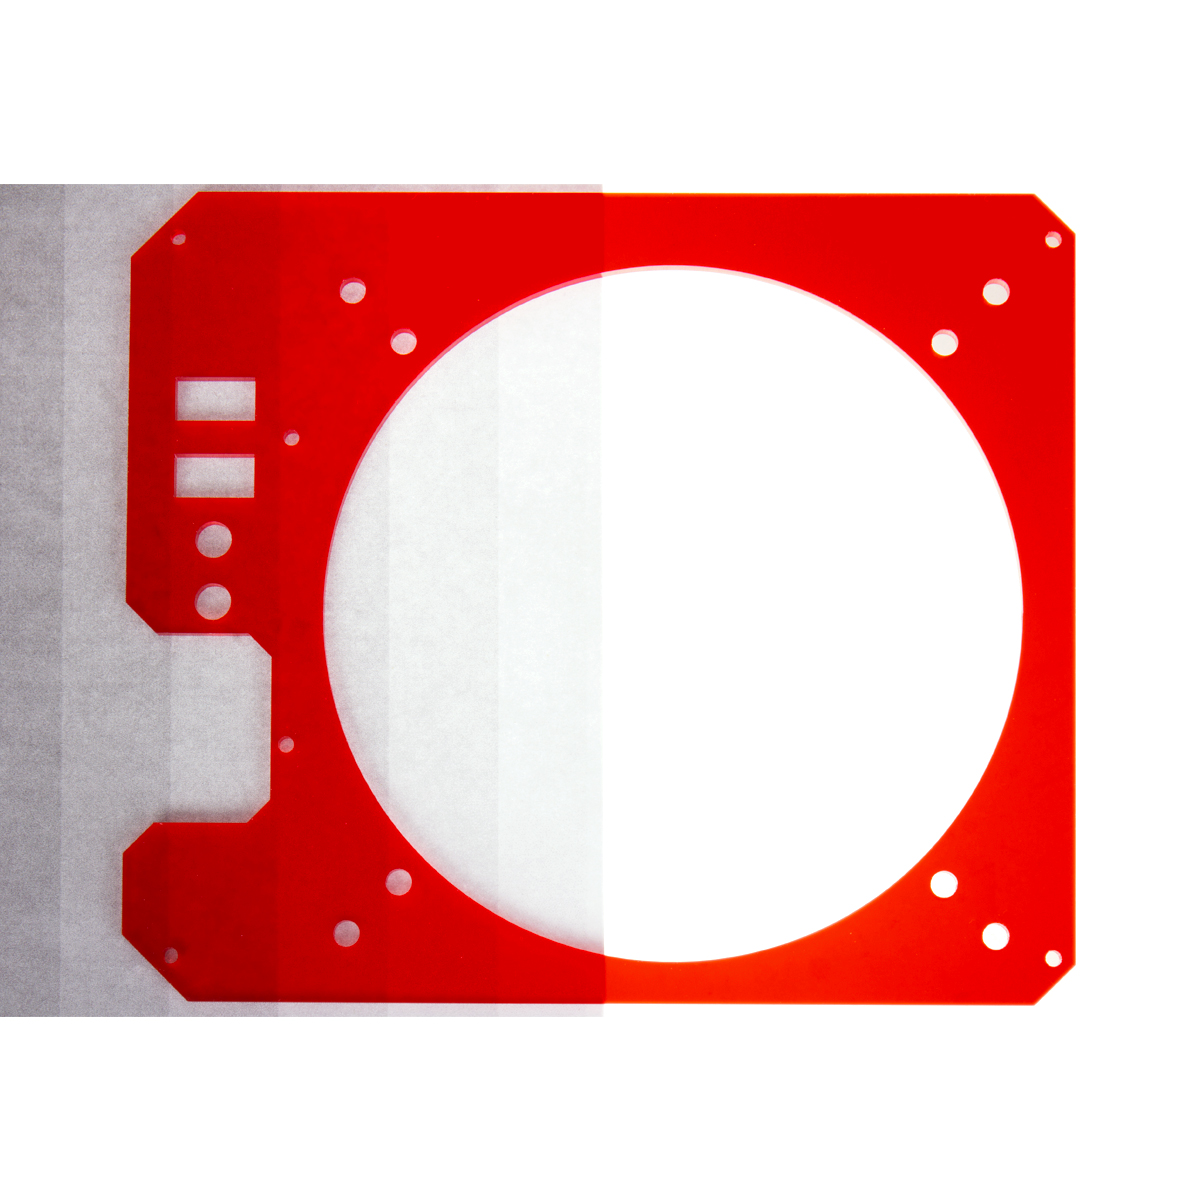 Lazer3D LZ7 Right Panel - Chilli Red Open